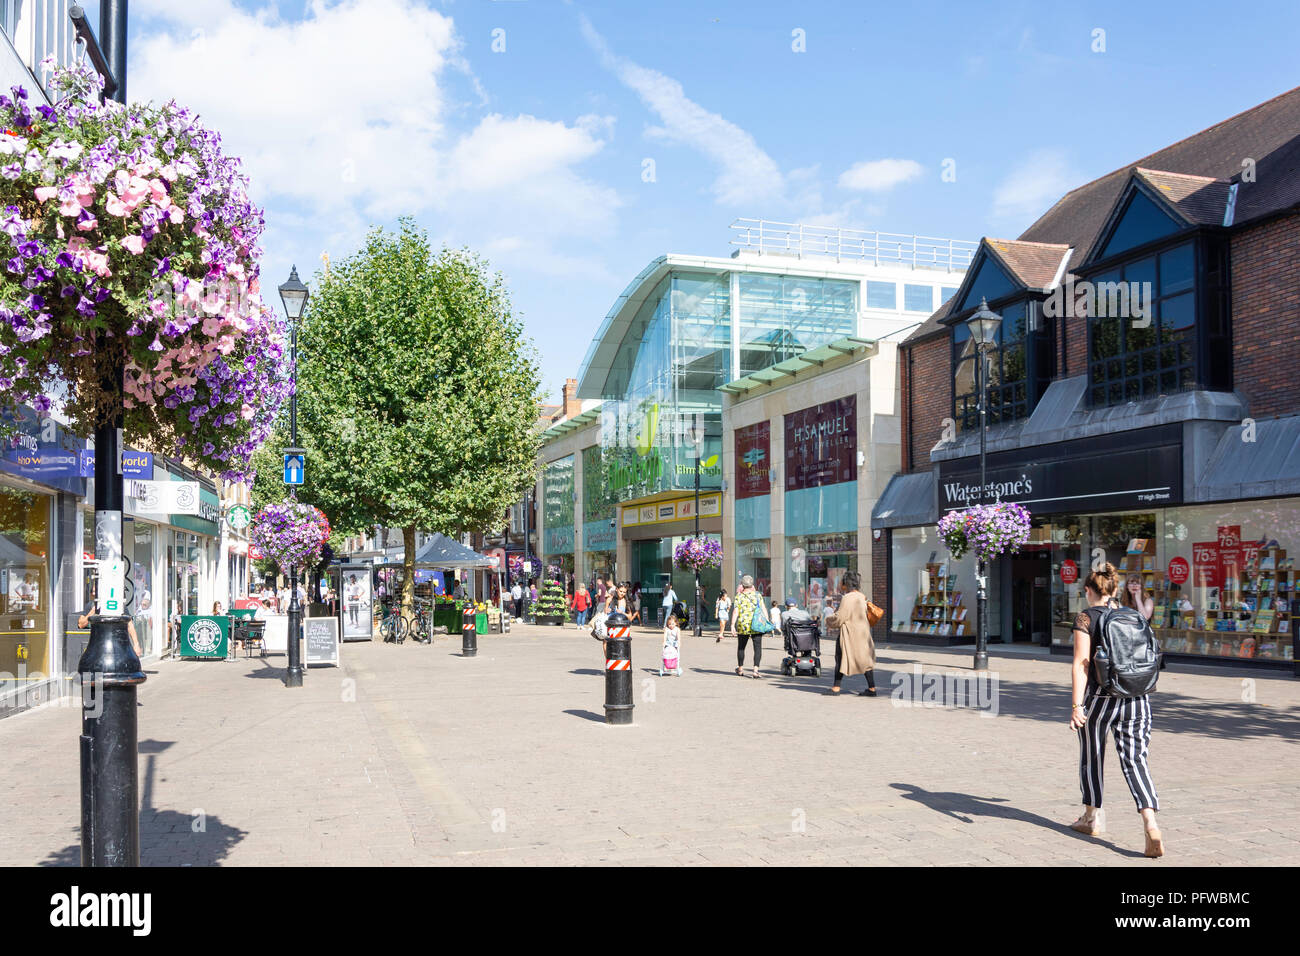 Pedestrianised High Street, Staines-upon-Thames, Surrey, England, United Kingdom Stock Photo